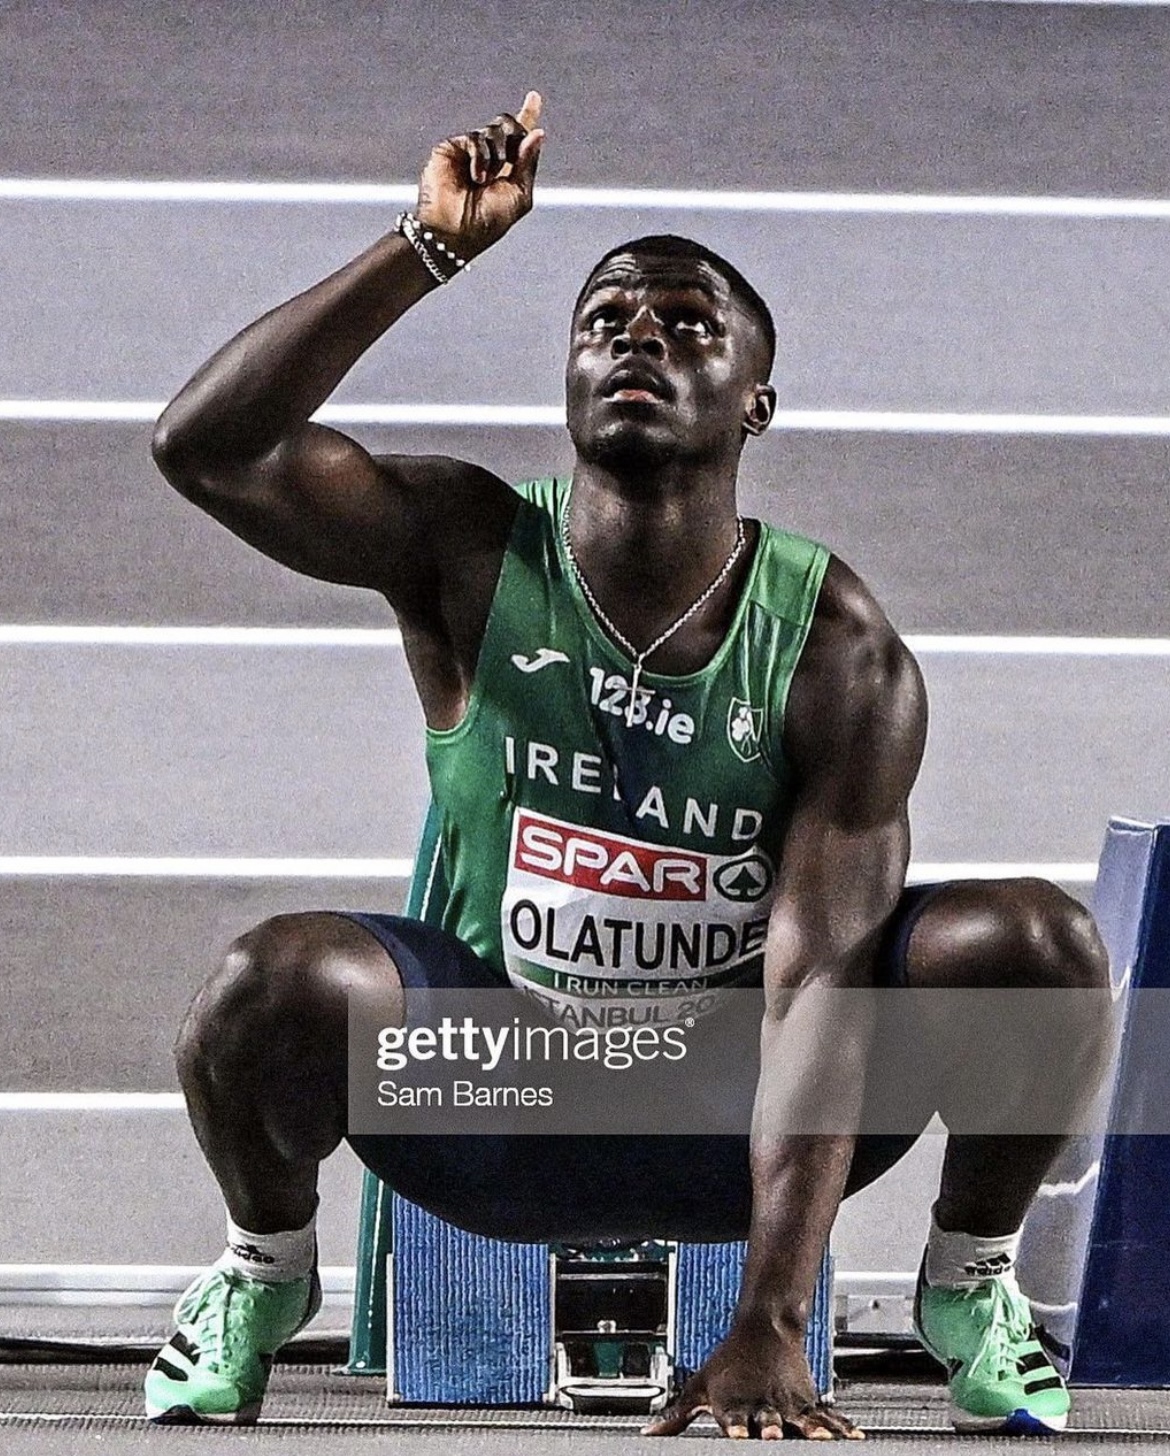 Israel Olatunde getting ready to race, looking up to the sky